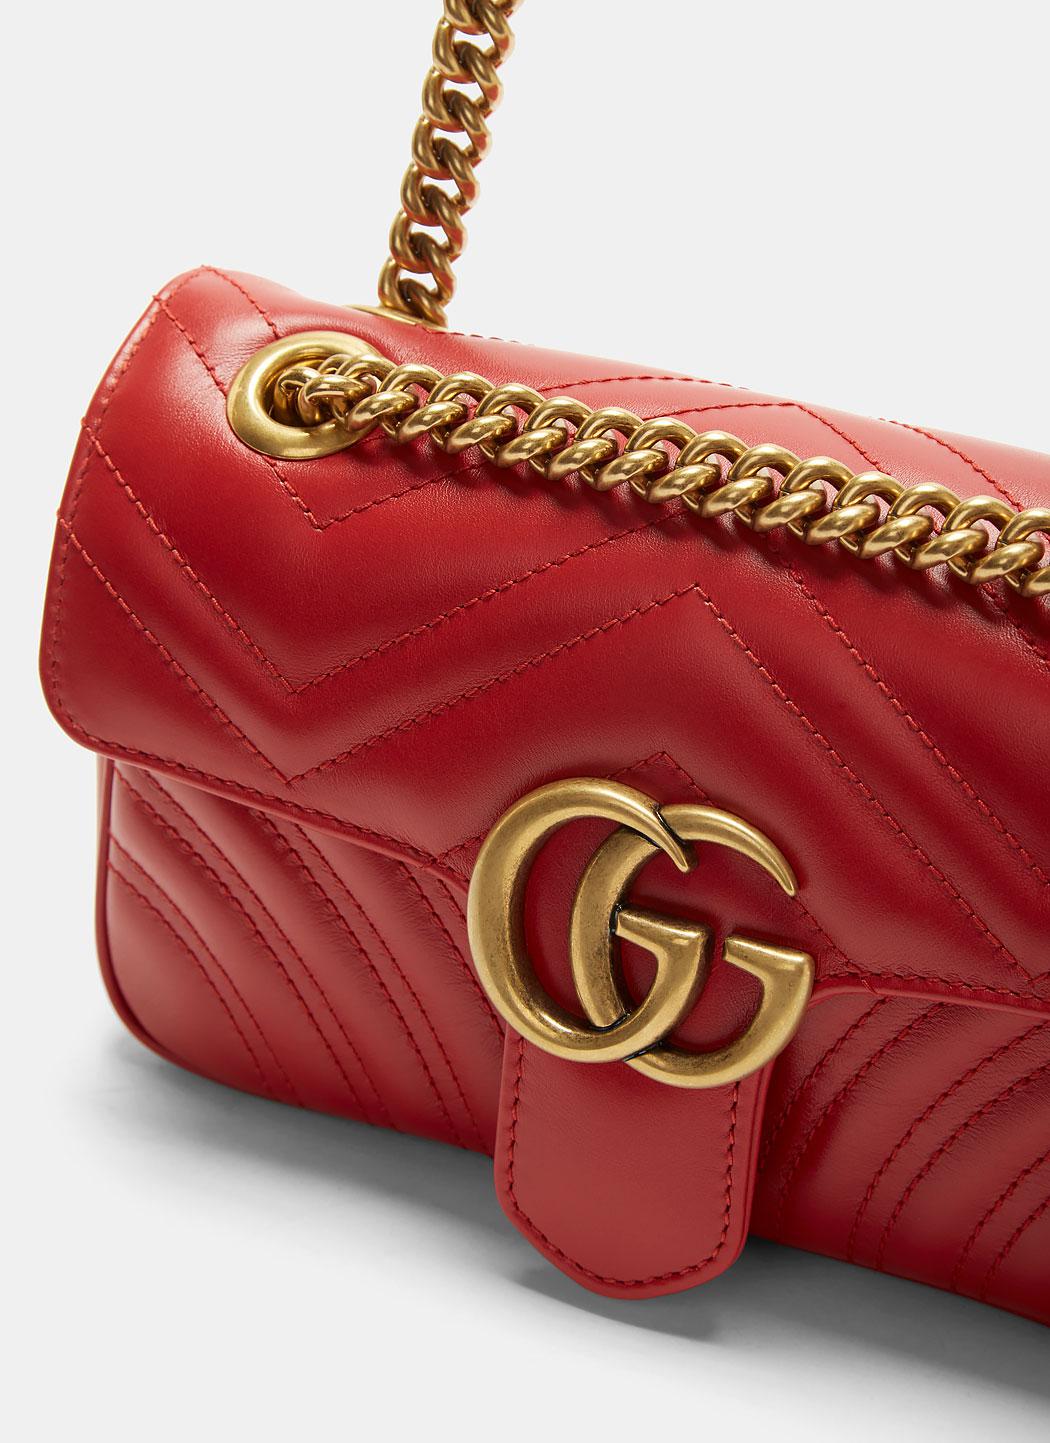 Gucci Leather Gg Marmont Matelassé Mini Chain Shoulder Bag In Red - Lyst